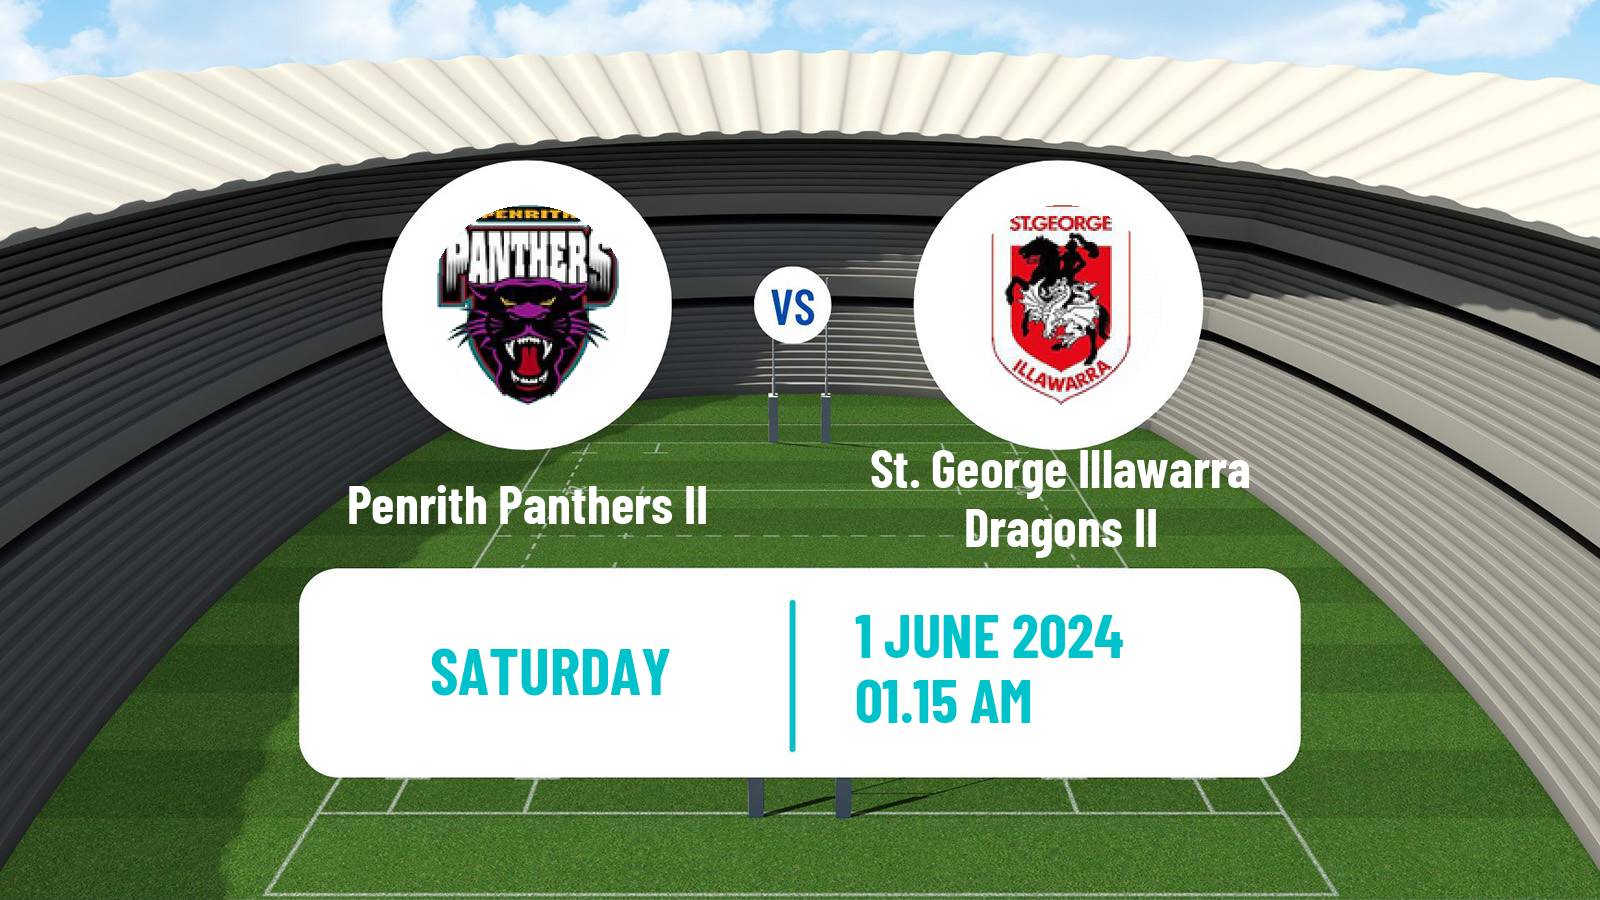 Rugby league Australian NSW Cup Penrith Panthers II - St. George Illawarra Dragons II